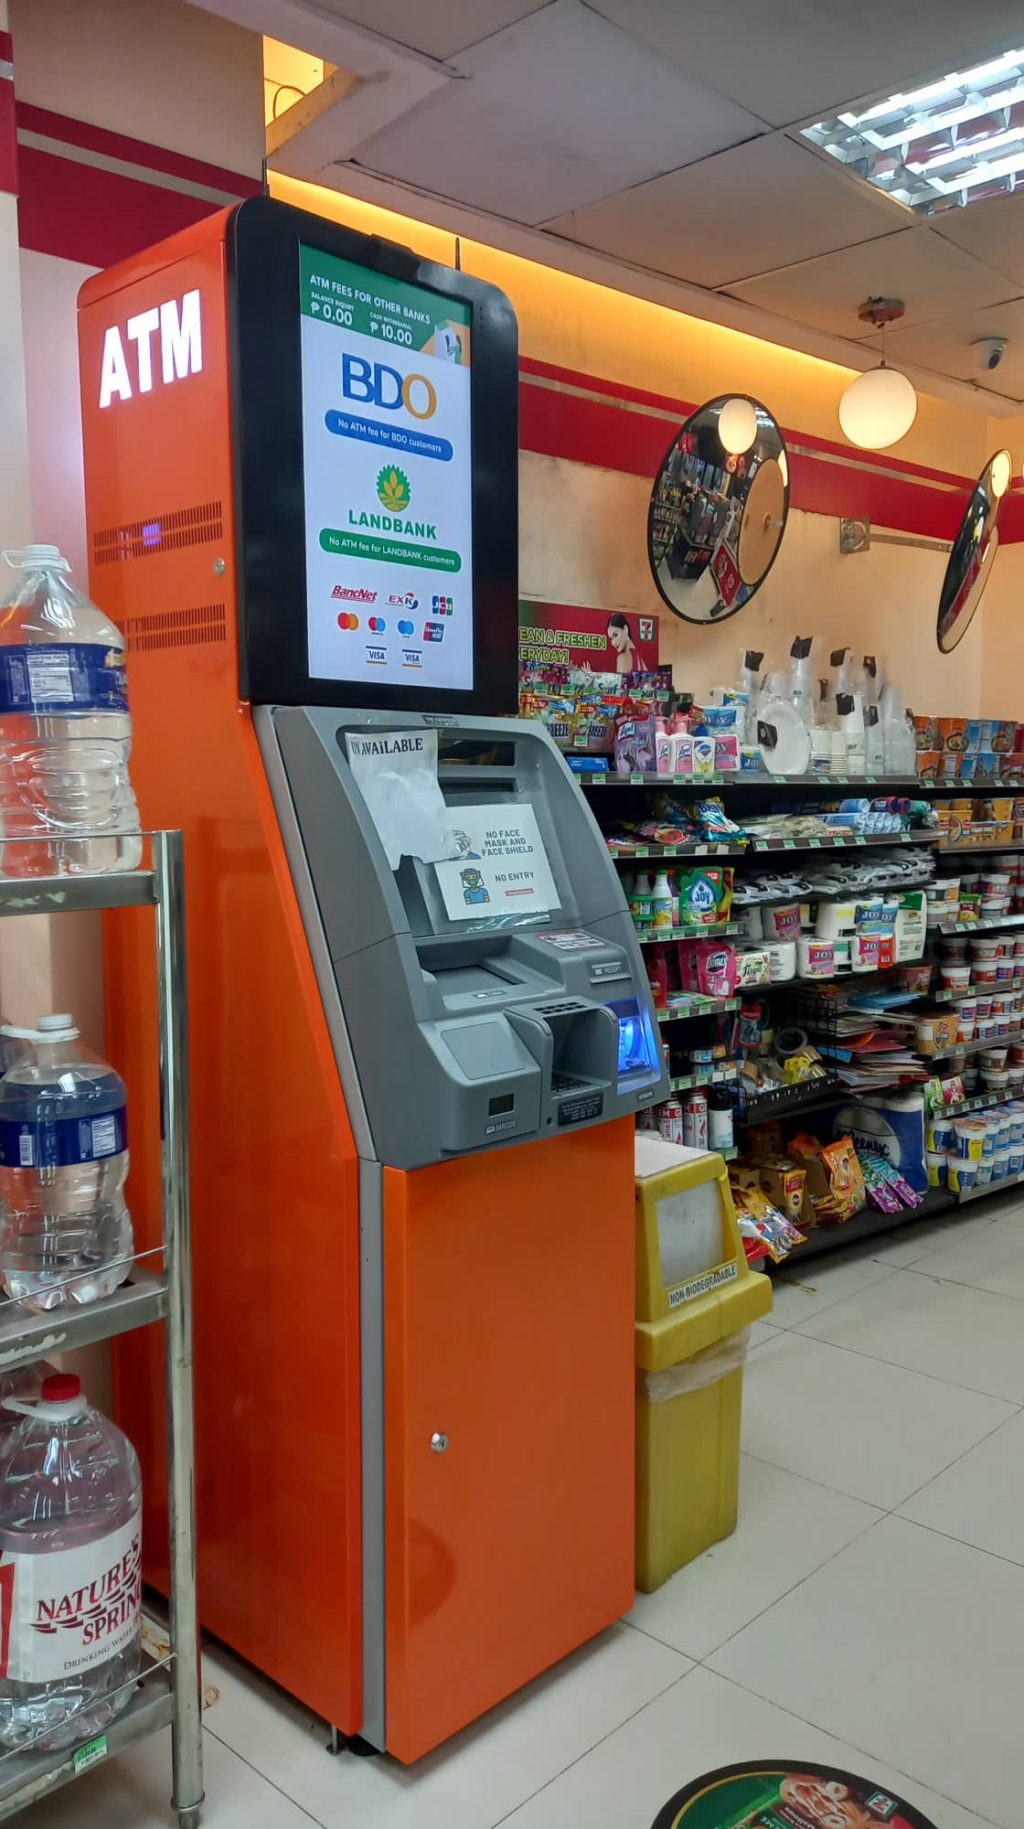 Landbank Bdo Holders Can Now Withdraw At 7 Eleven Atms For Free